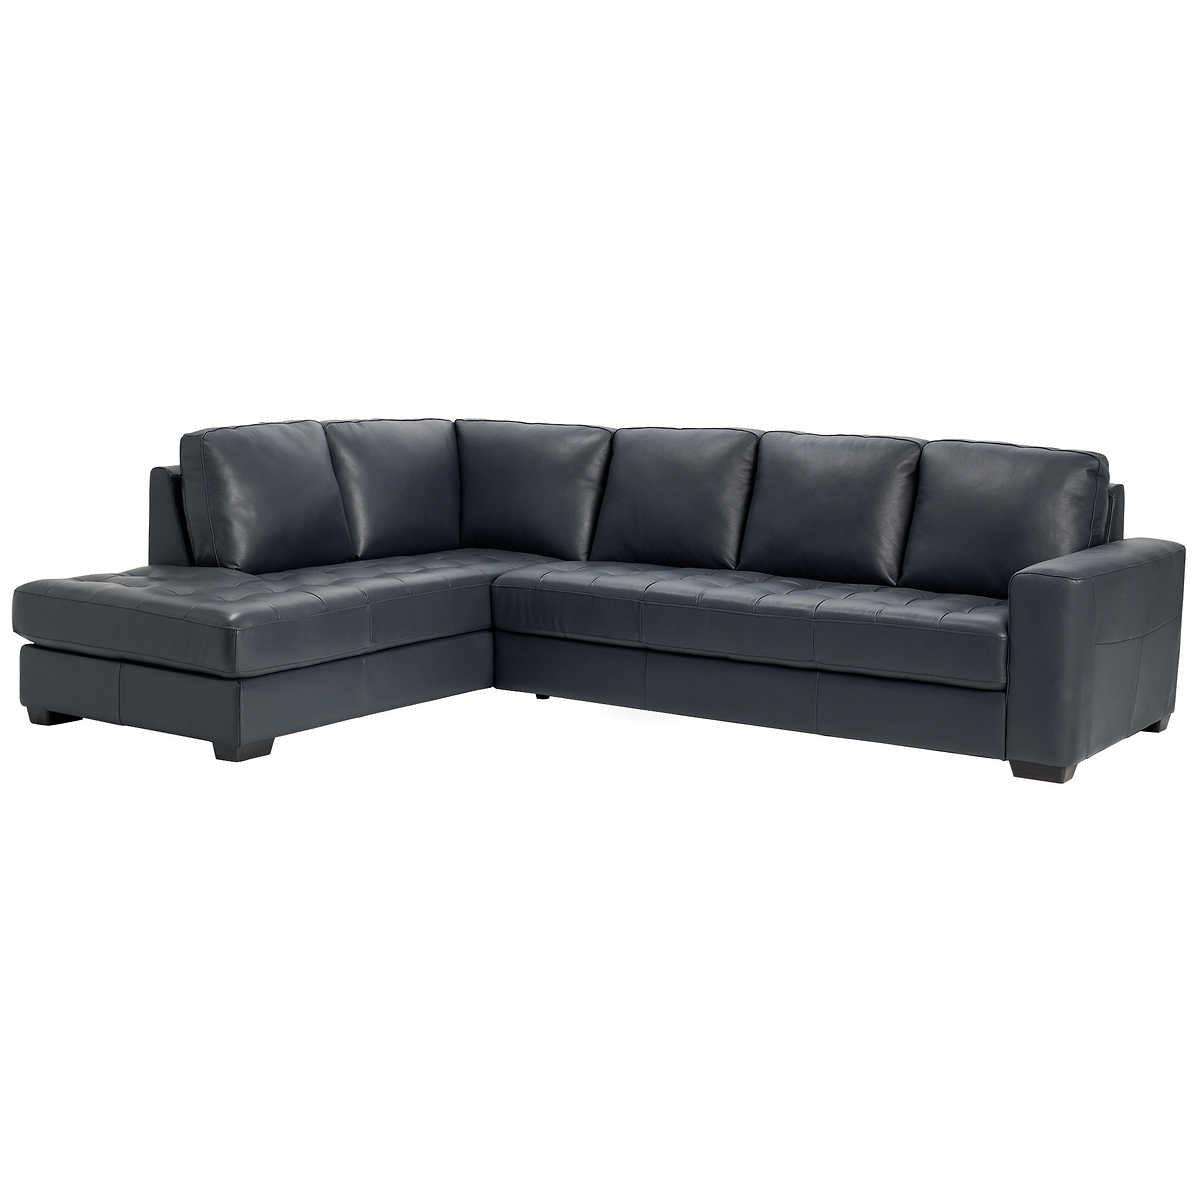 BE7432/BE7361 Modern 2-piece Top Grain Leather Sectional